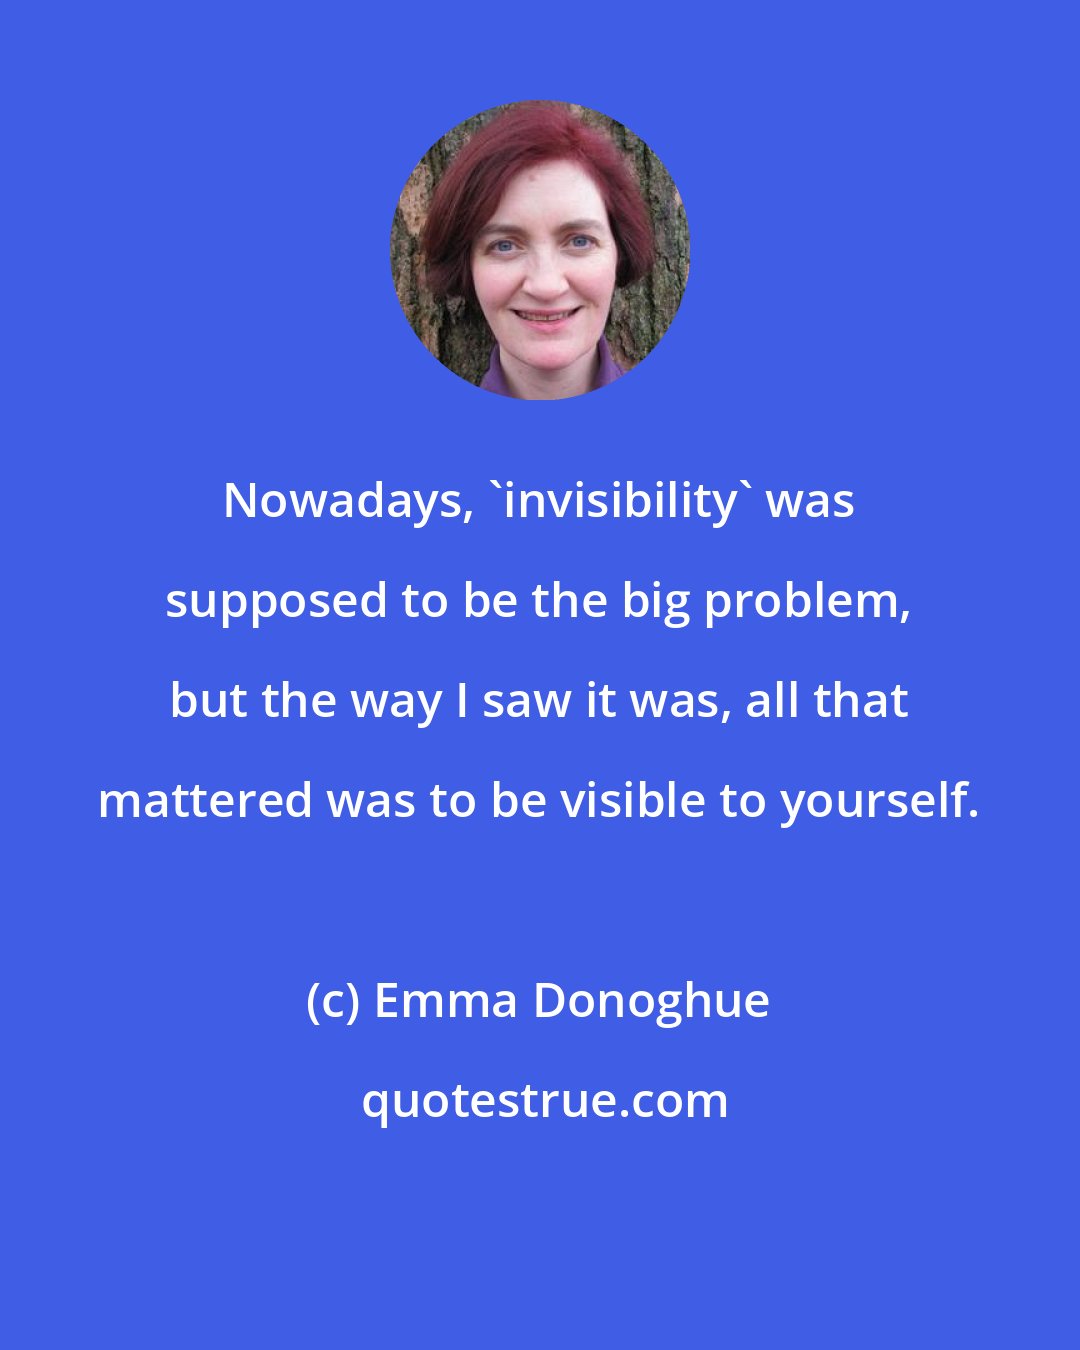 Emma Donoghue: Nowadays, 'invisibility' was supposed to be the big problem, but the way I saw it was, all that mattered was to be visible to yourself.